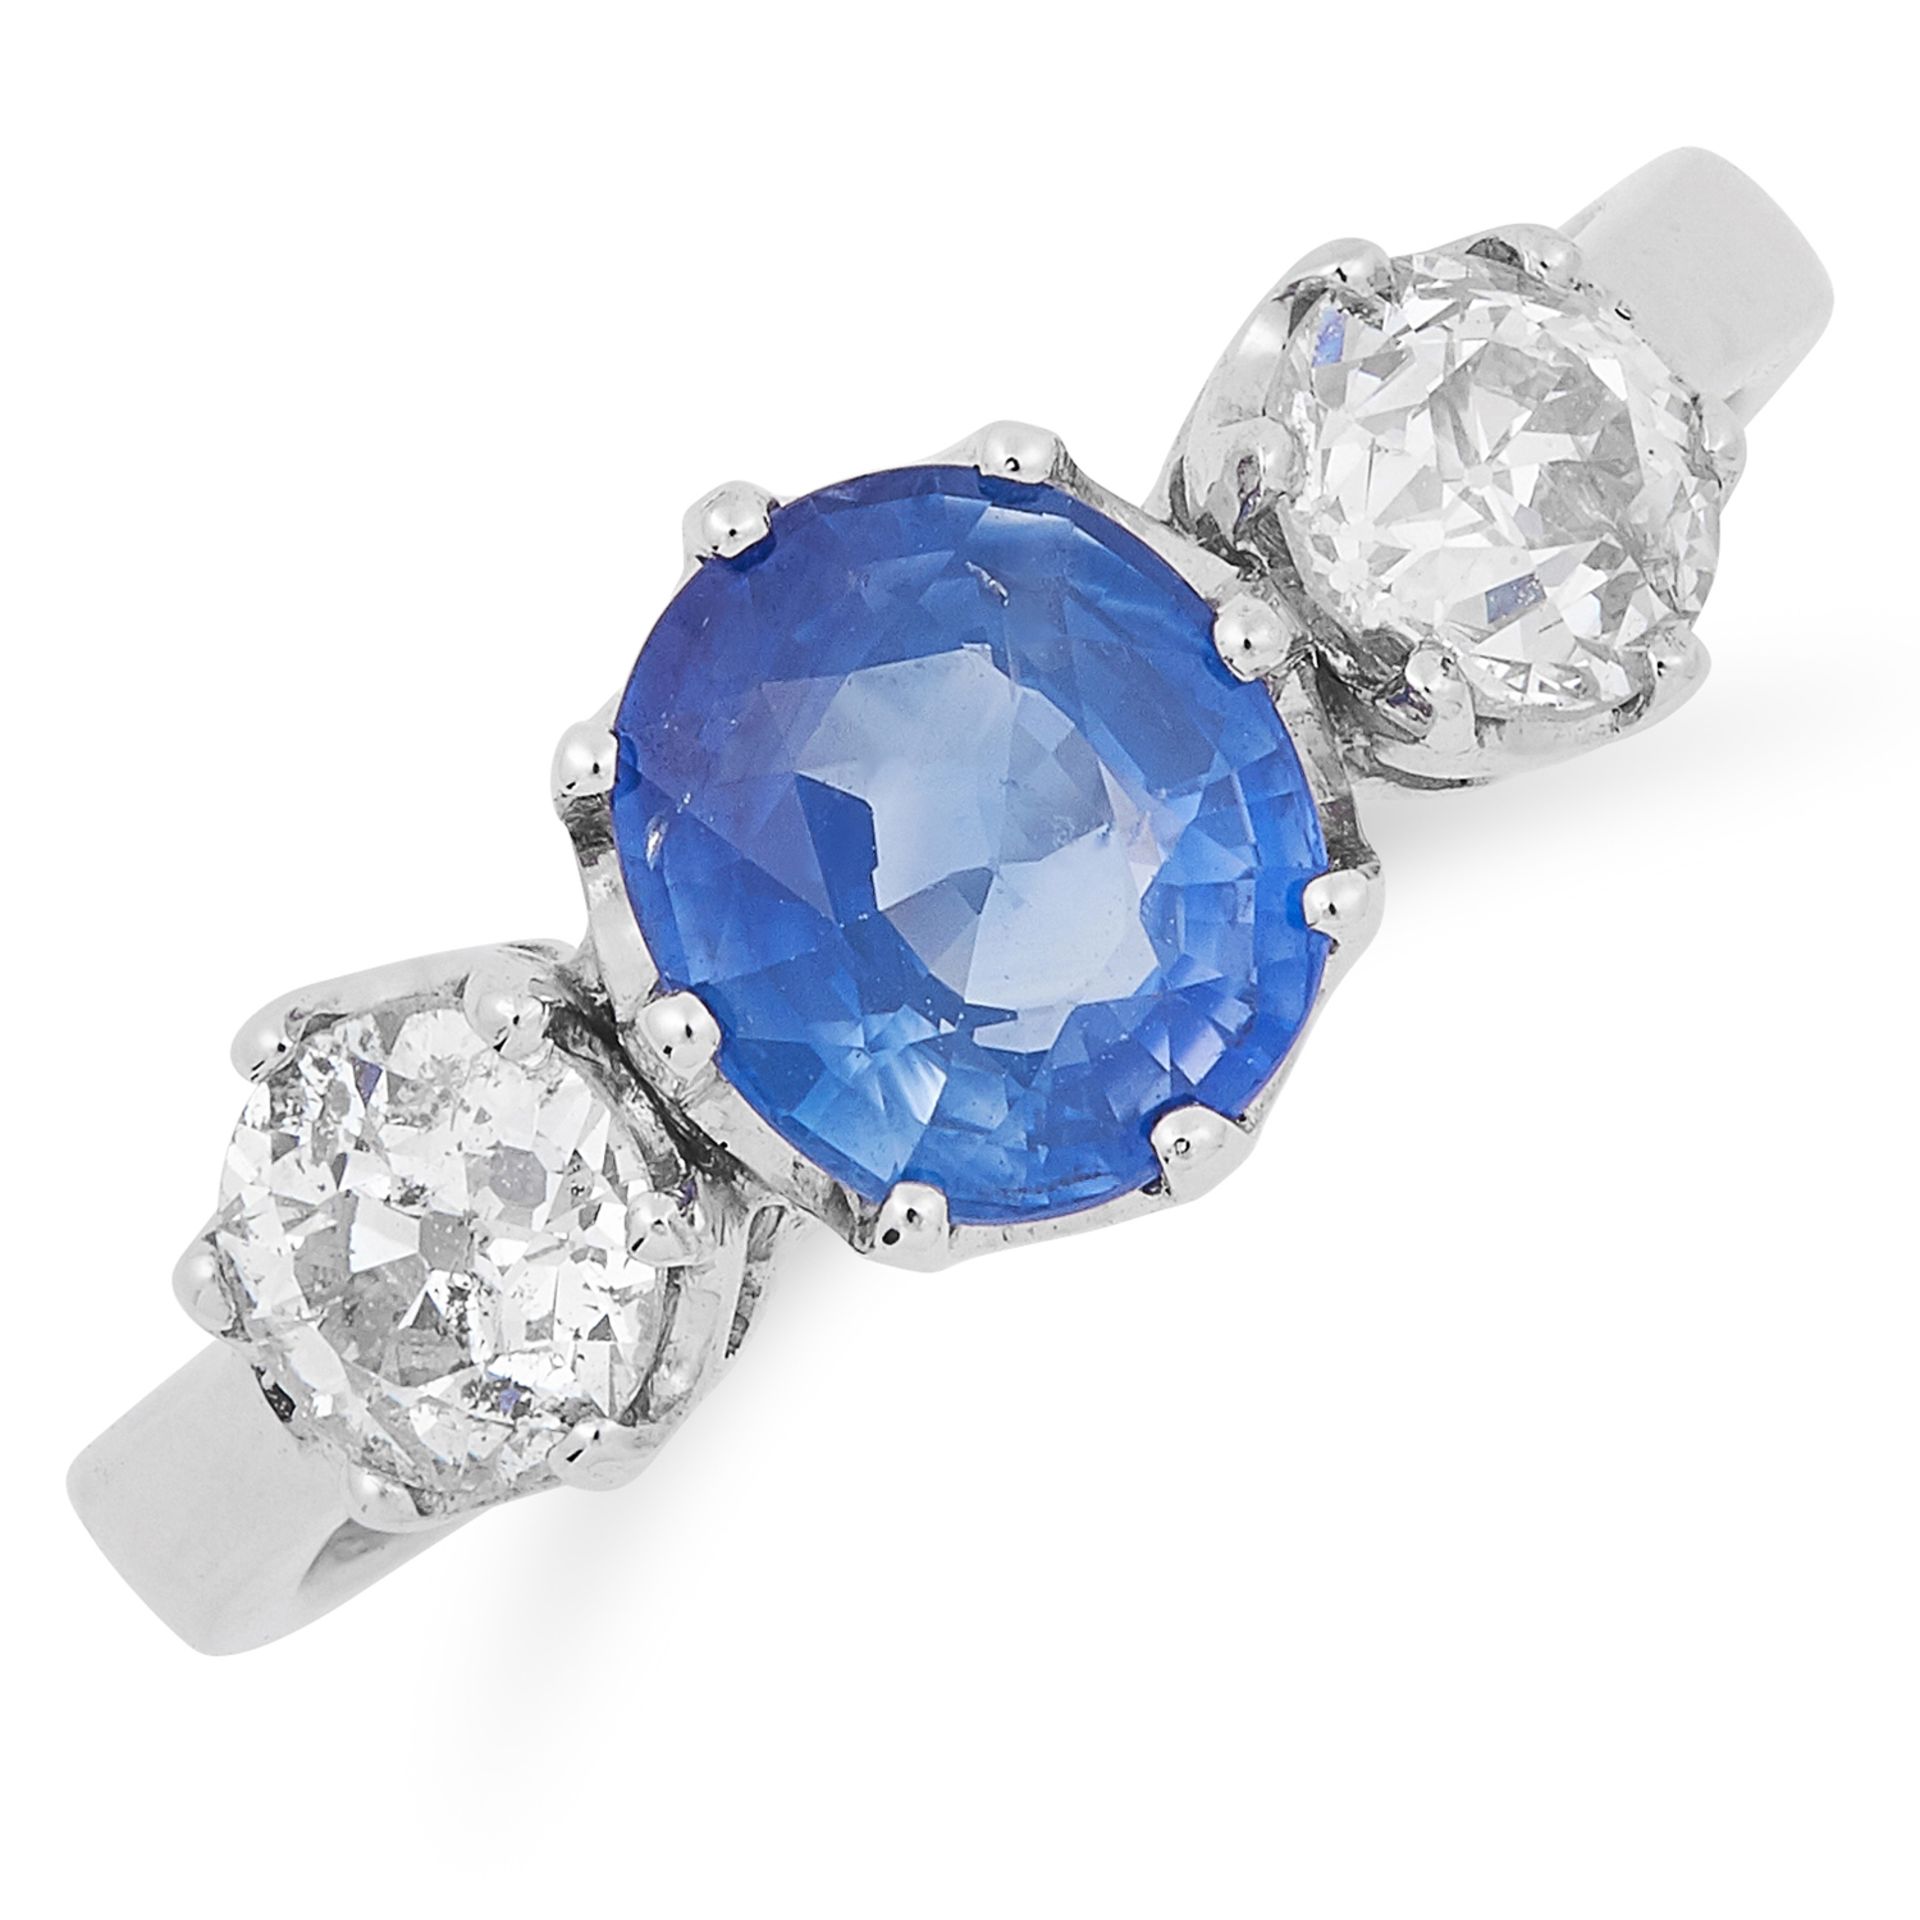 SAPPHIRE AND DIAMOND THREE STONE RING set with an oval cut sapphire of approximately 1.14 carats